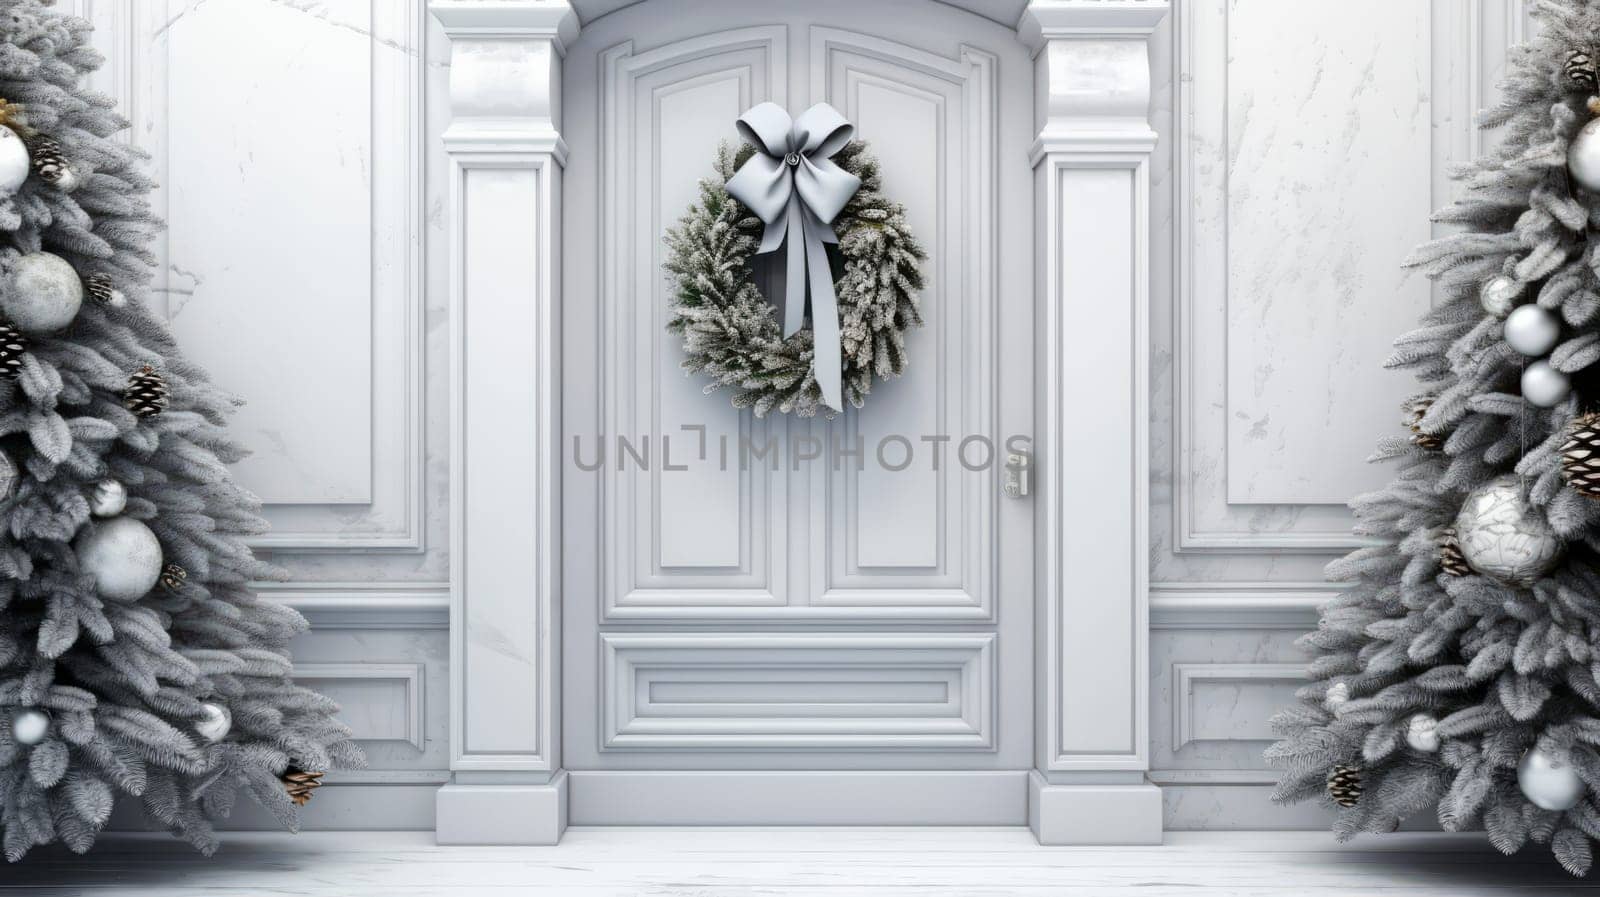 The bright facade of the building is decorated with a beautiful Christmas wreath. by Spirina